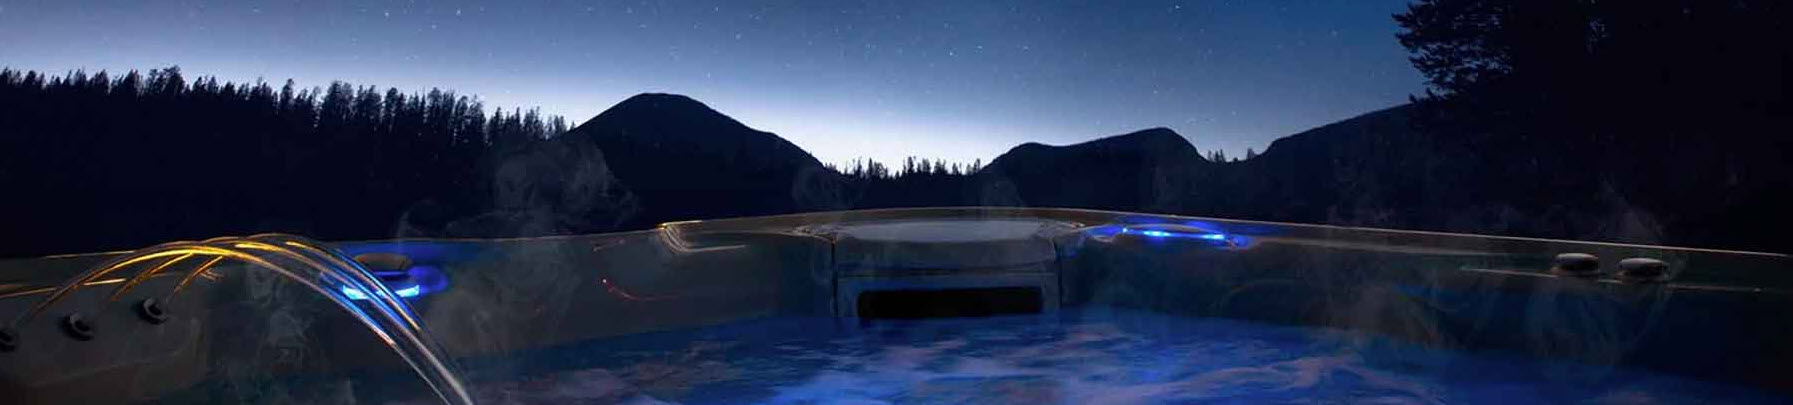 Reduce Joint Pain with Hot Water Hydrotherapy, Hot Tub Sale Medford